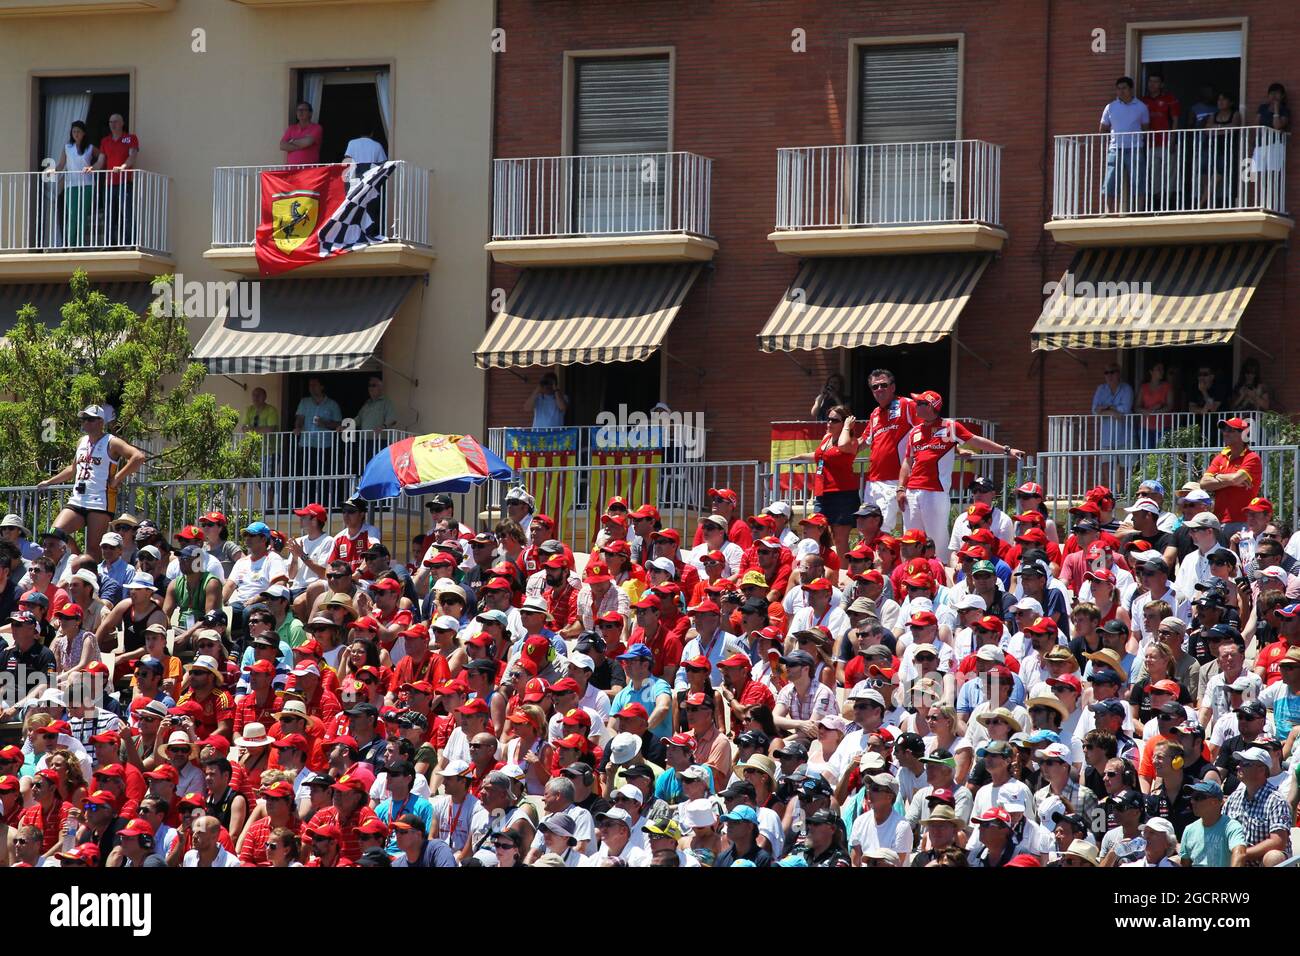 Fans in the grandstands and surrounding buildings. European Grand Prix, Sunday 24th June 2012. Valencia, Spain. Stock Photo